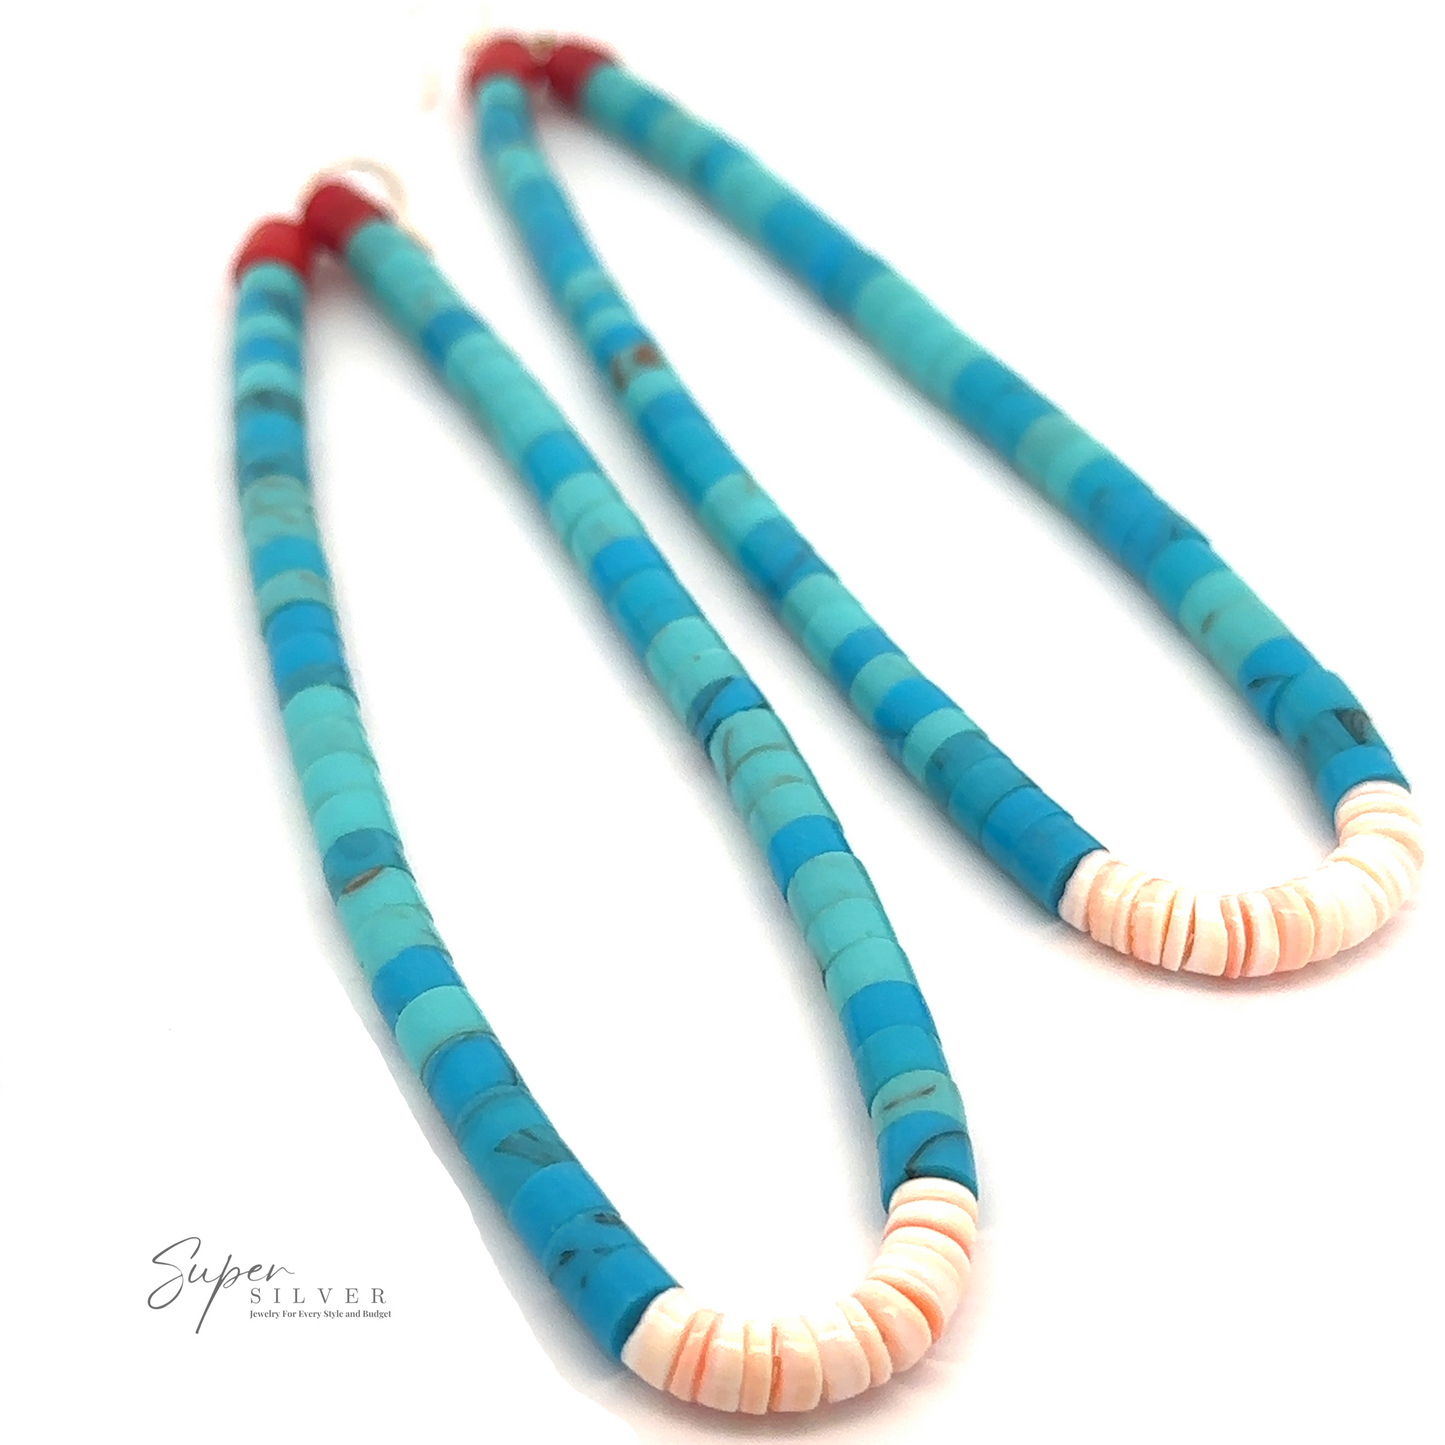 
                  
                    A pair of Long Turquoise Native American Beaded Earrings is arranged in a U-shape on a white background with the text "Super Silver" in the lower left corner, reminiscent of Native American Jewelry.
                  
                